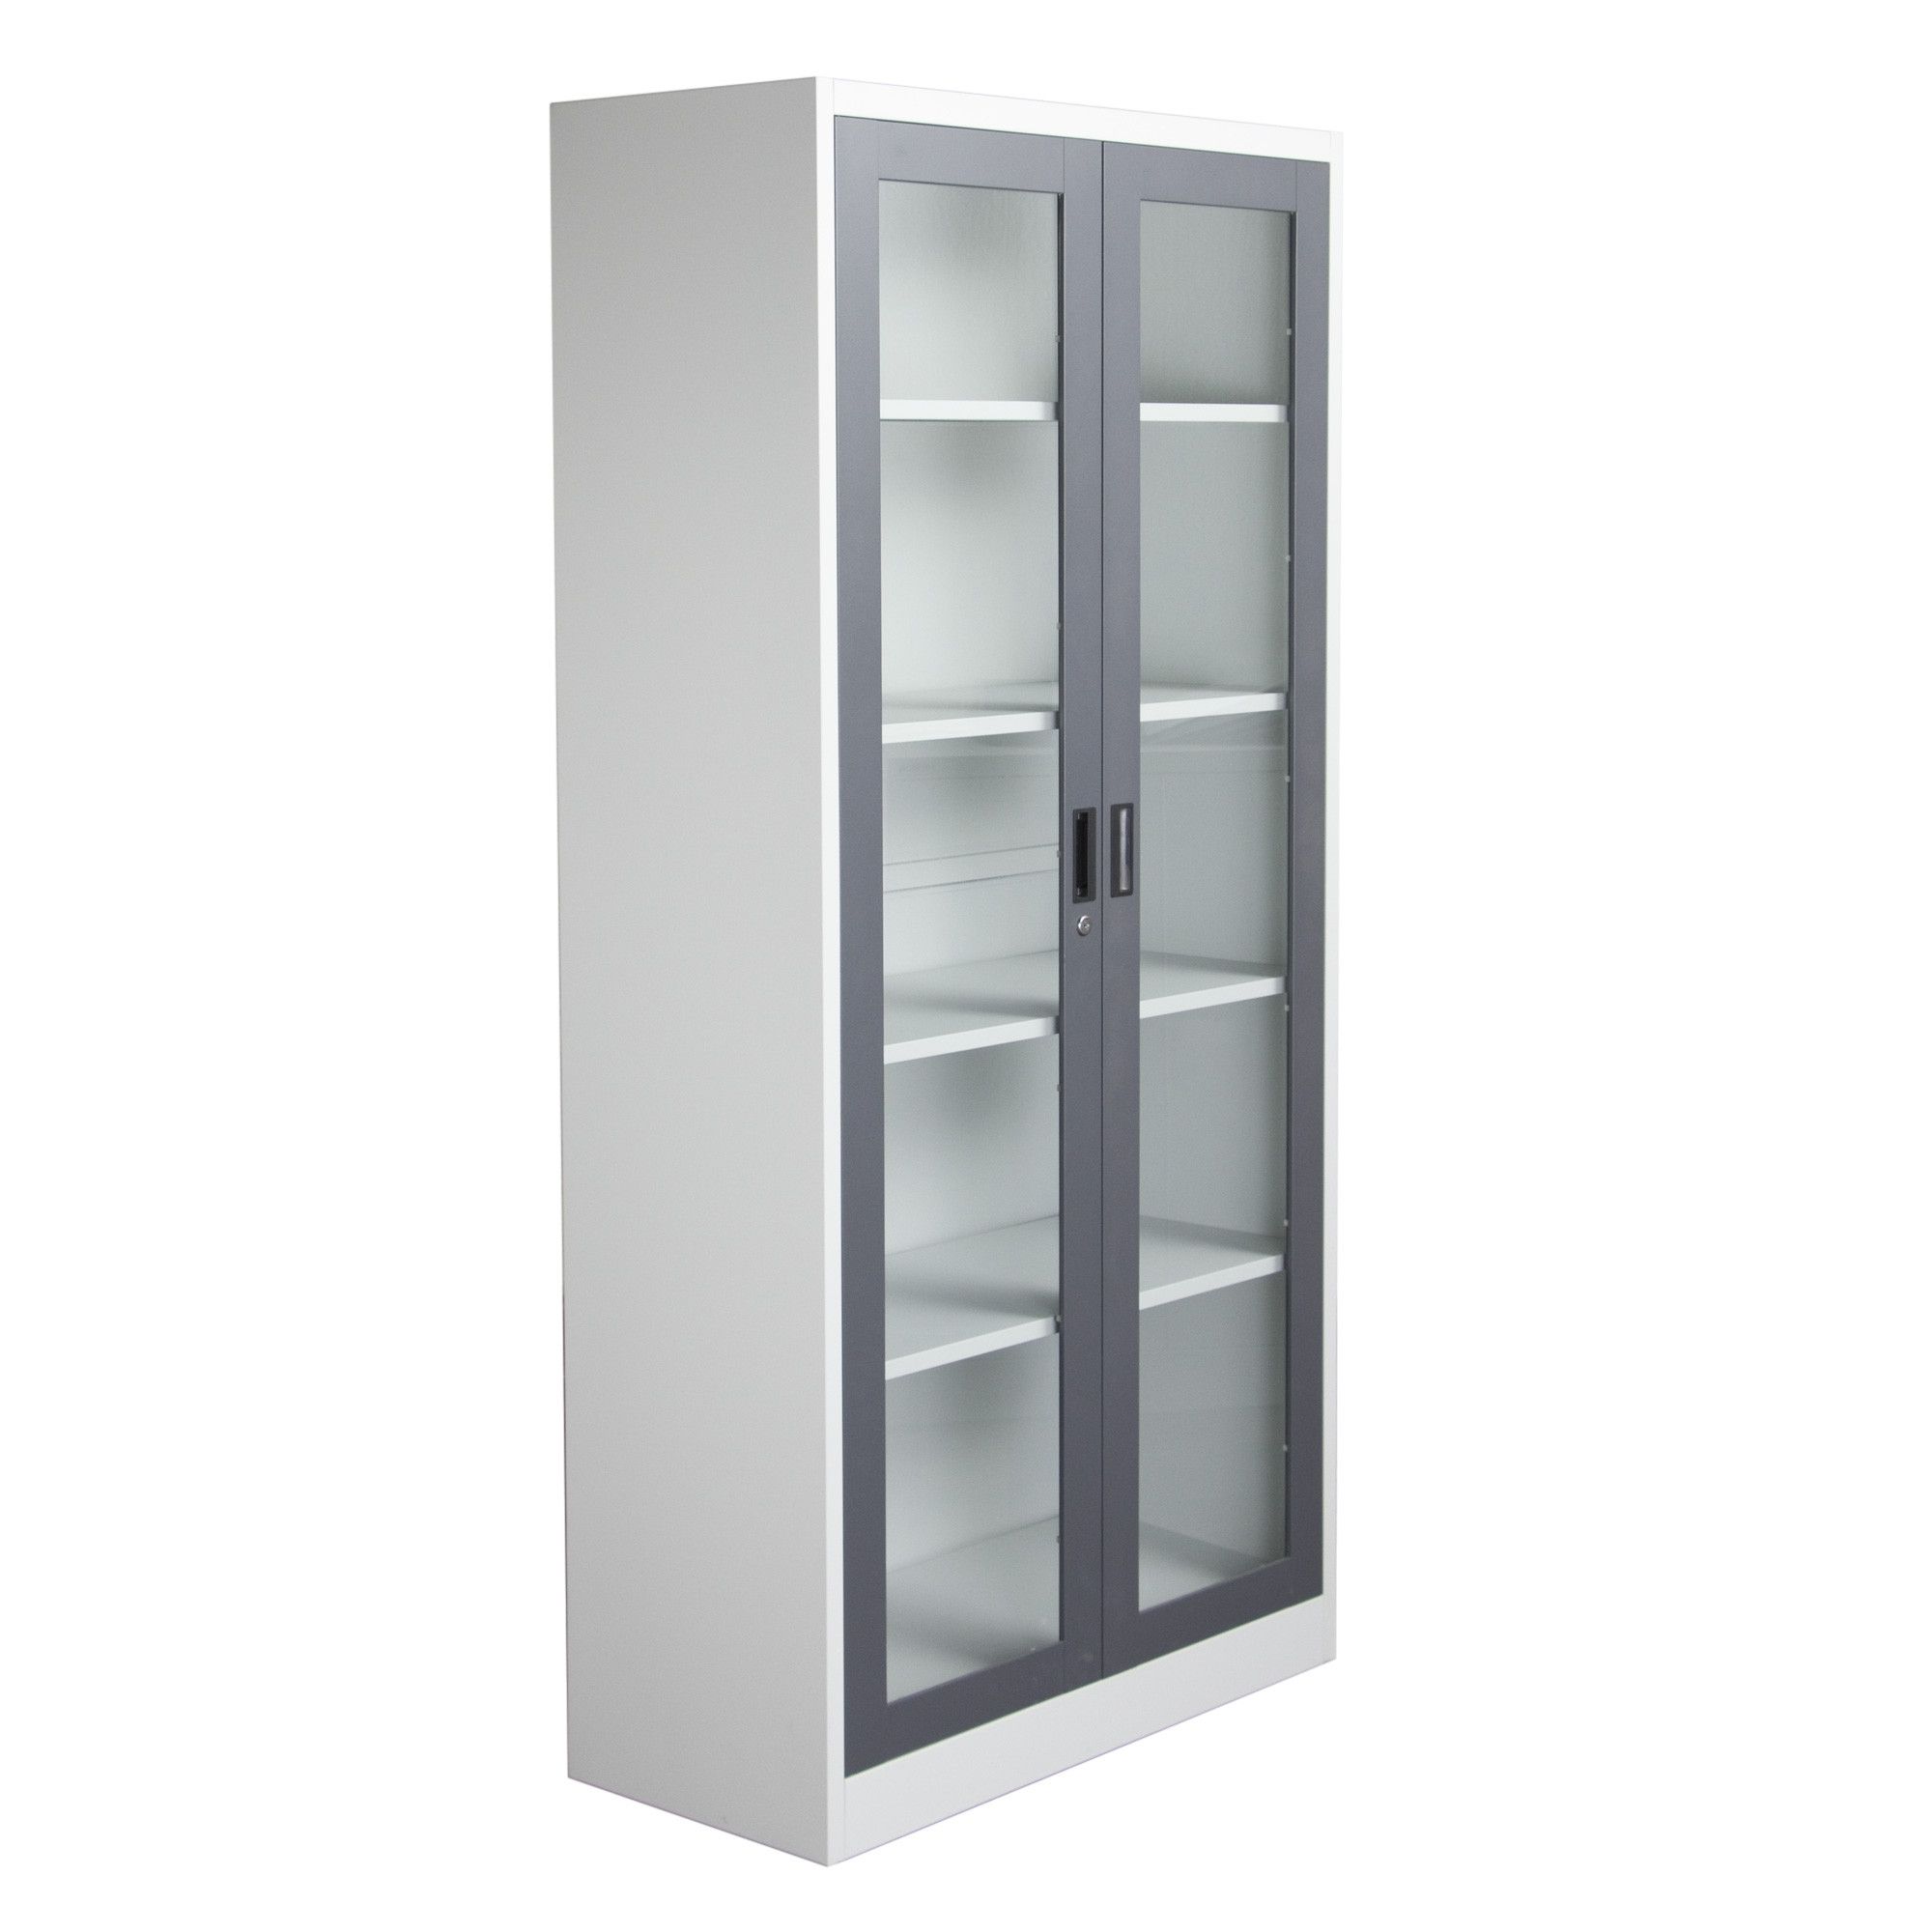 2 Door Bookcase With 5 Shelves In Dark Grey/off White, Diamond Throughout Trendy White Bookcases With Doors (View 11 of 15)